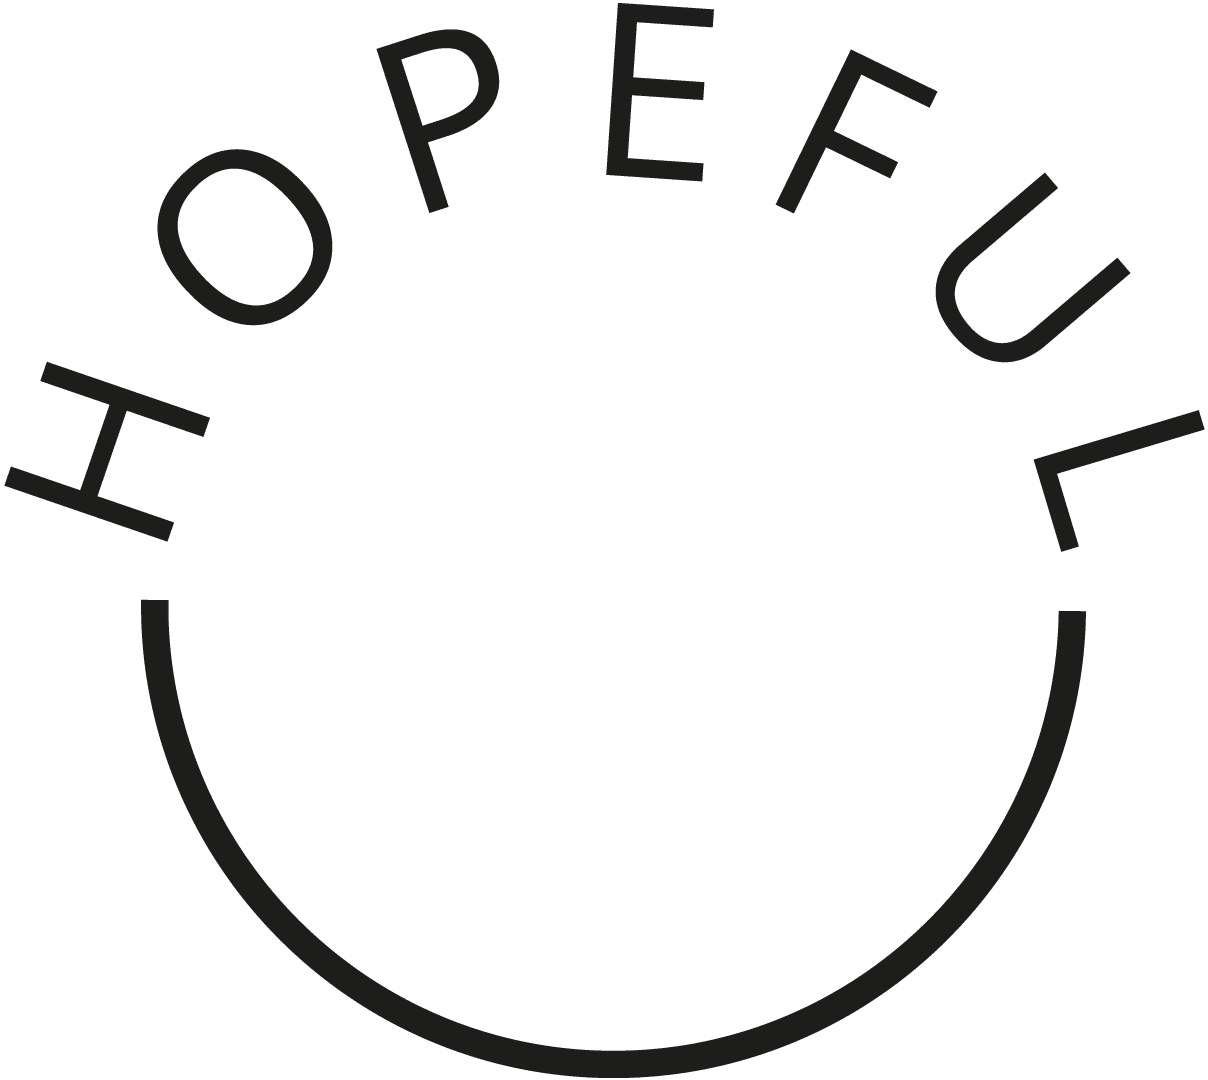 The logo of Hopeful Studio, a design agency based in Liverpool.